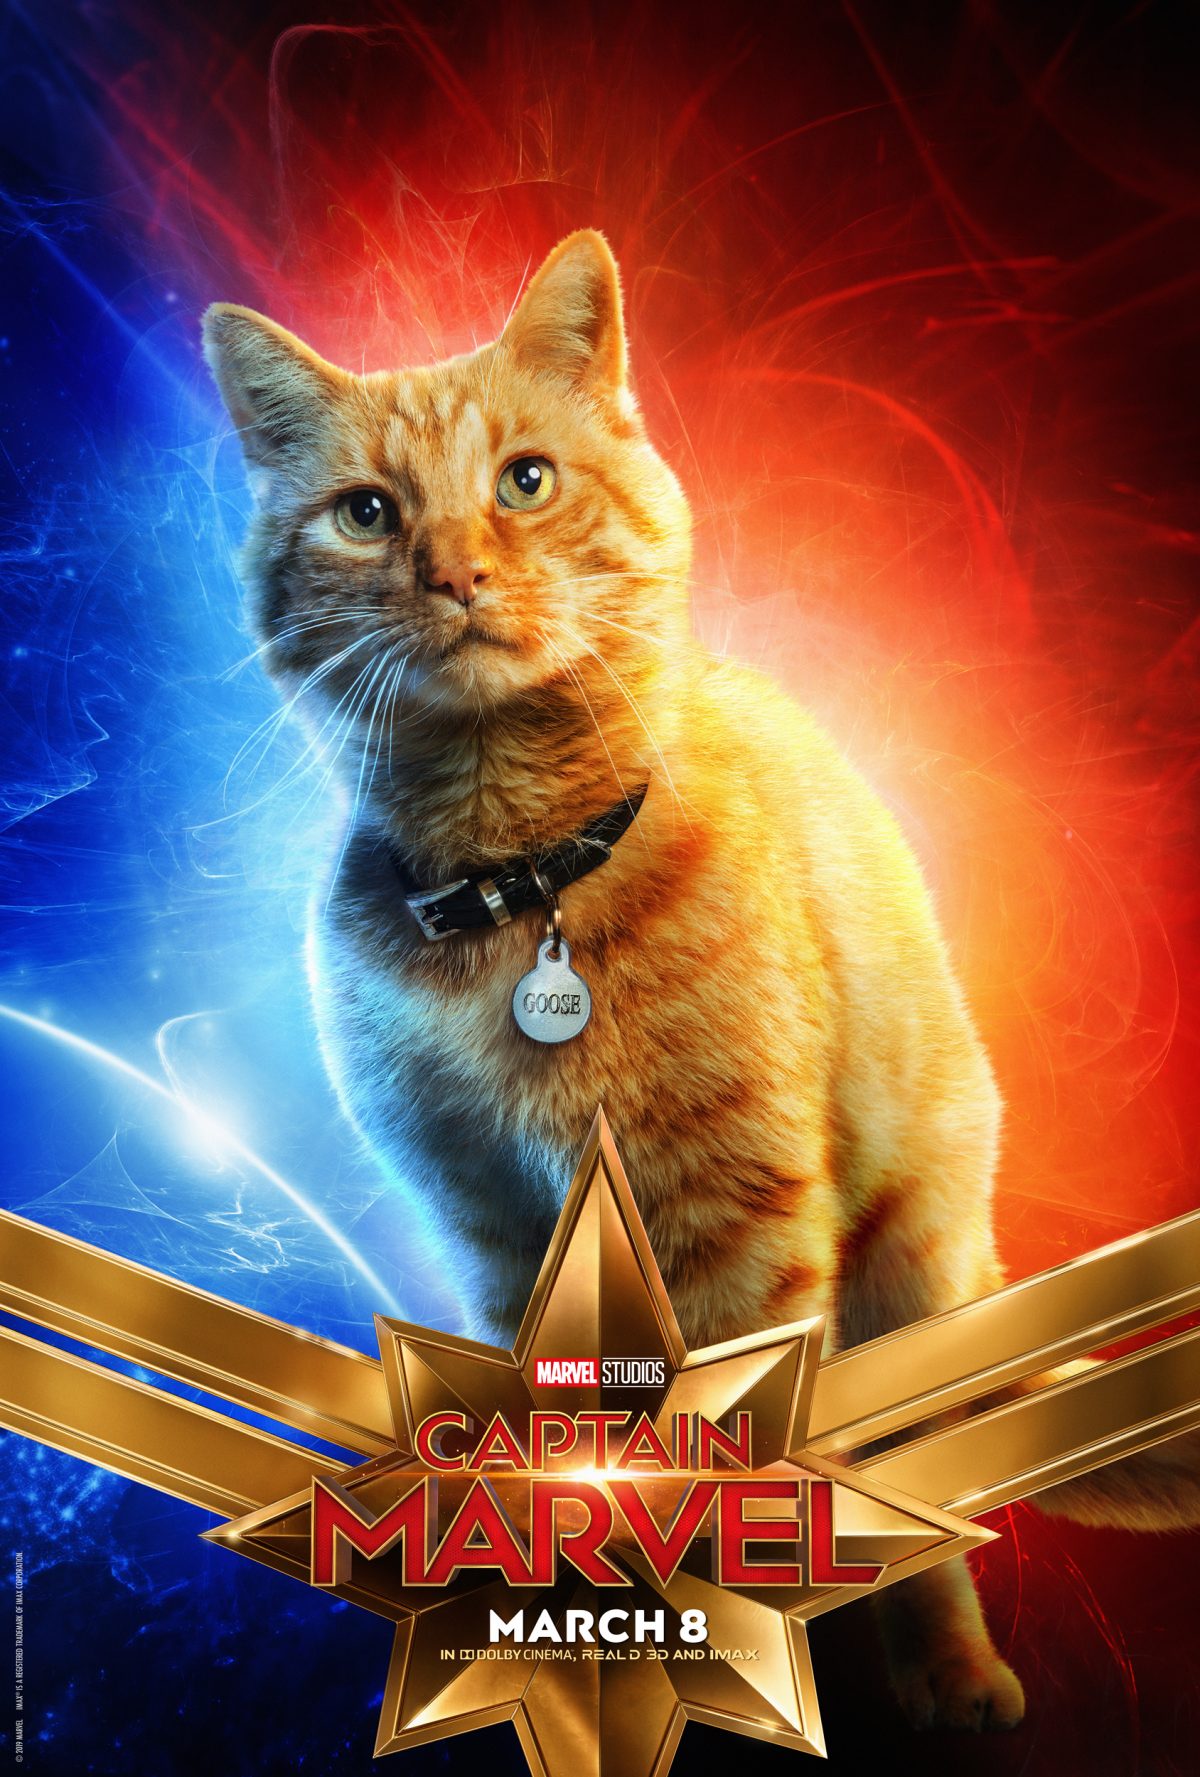 Captain Marvel Character Posters Now Available #CaptainMarvel